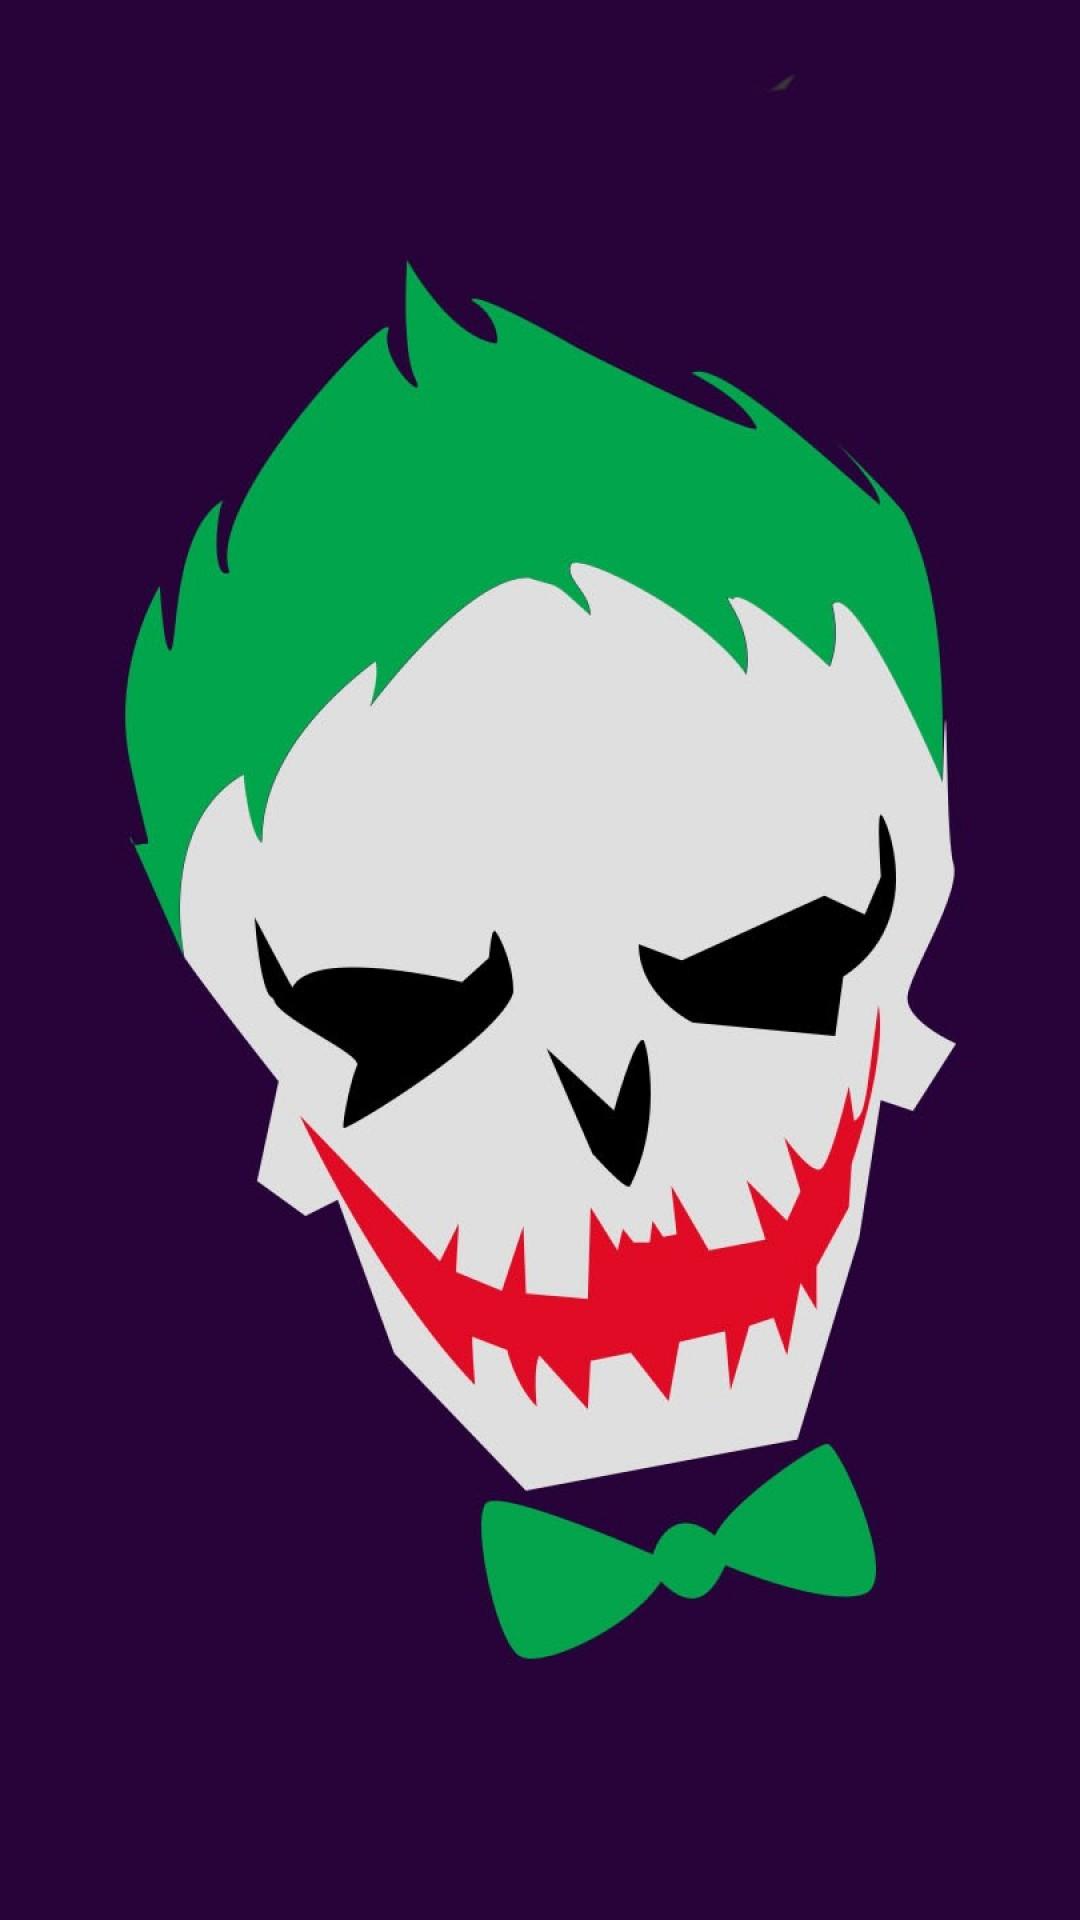 Cool Suicide Squad iPhone Wallpapers - Top Free Cool Suicide Squad ...